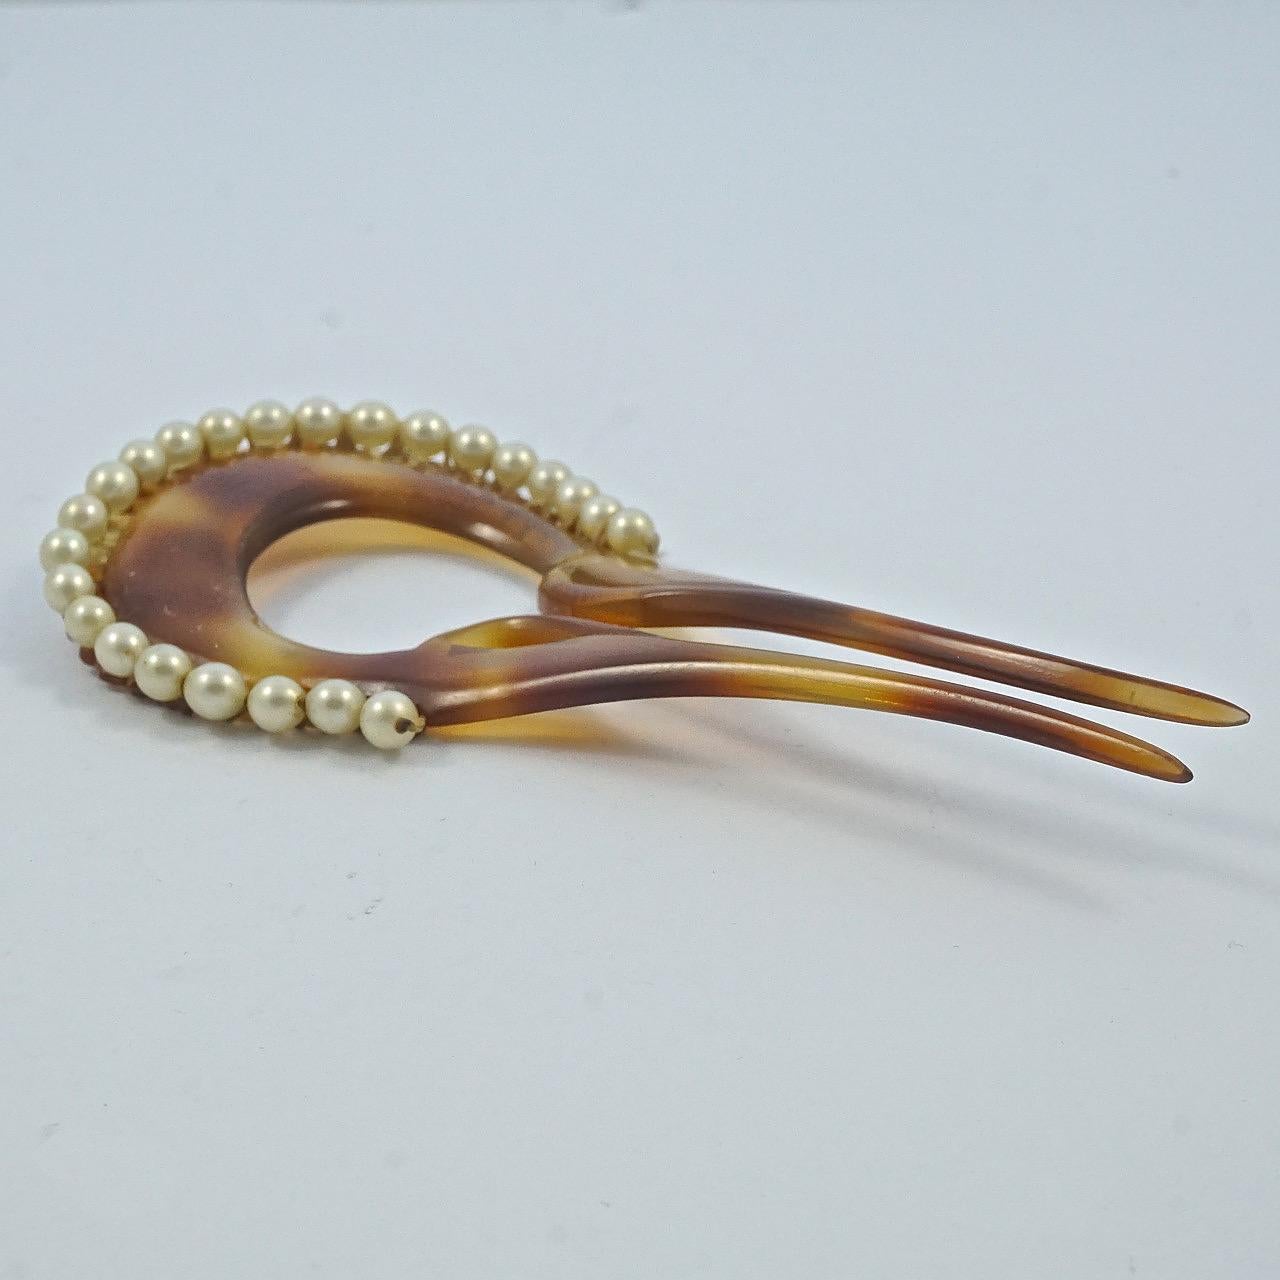 Women's or Men's Art Deco Faux Tortoiseshell Two Prong Hair Comb with Faux Pearls For Sale